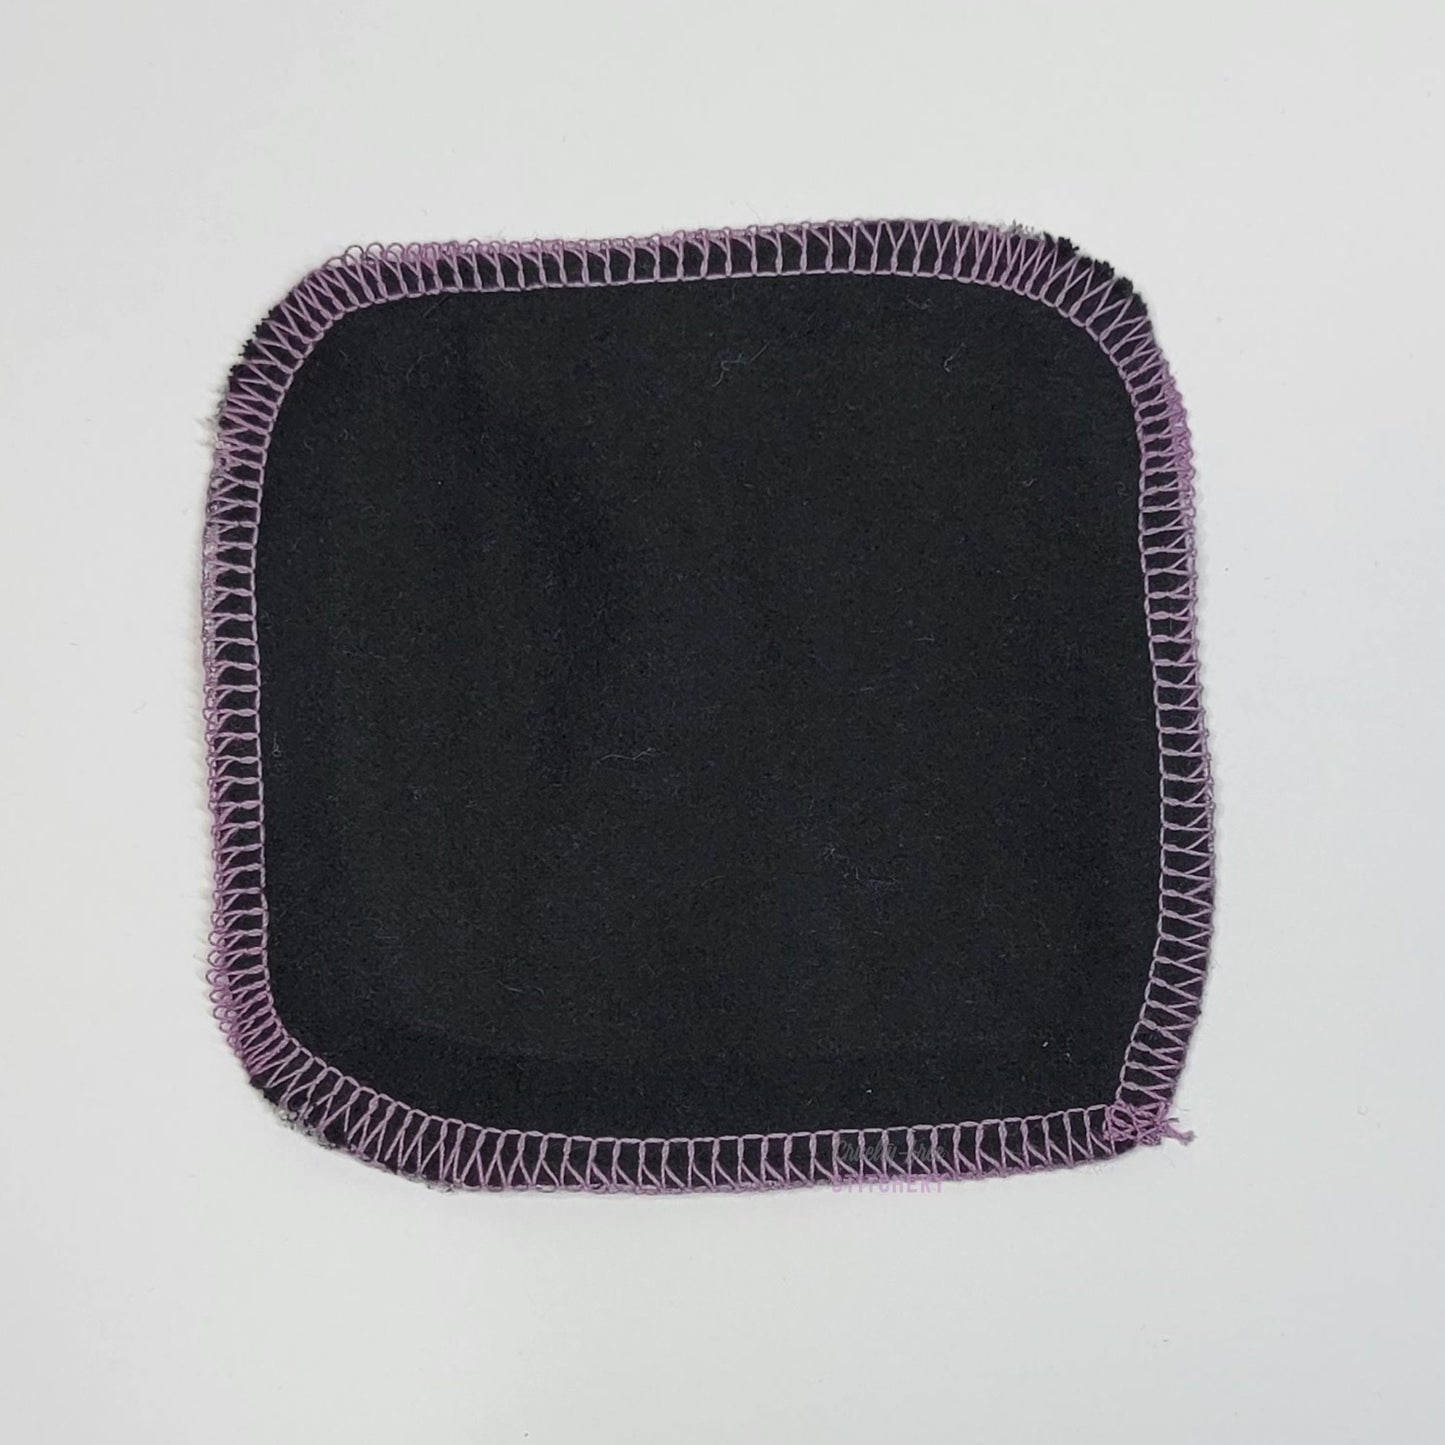 The back of one reusable cotton round - showing the back which is solid black.